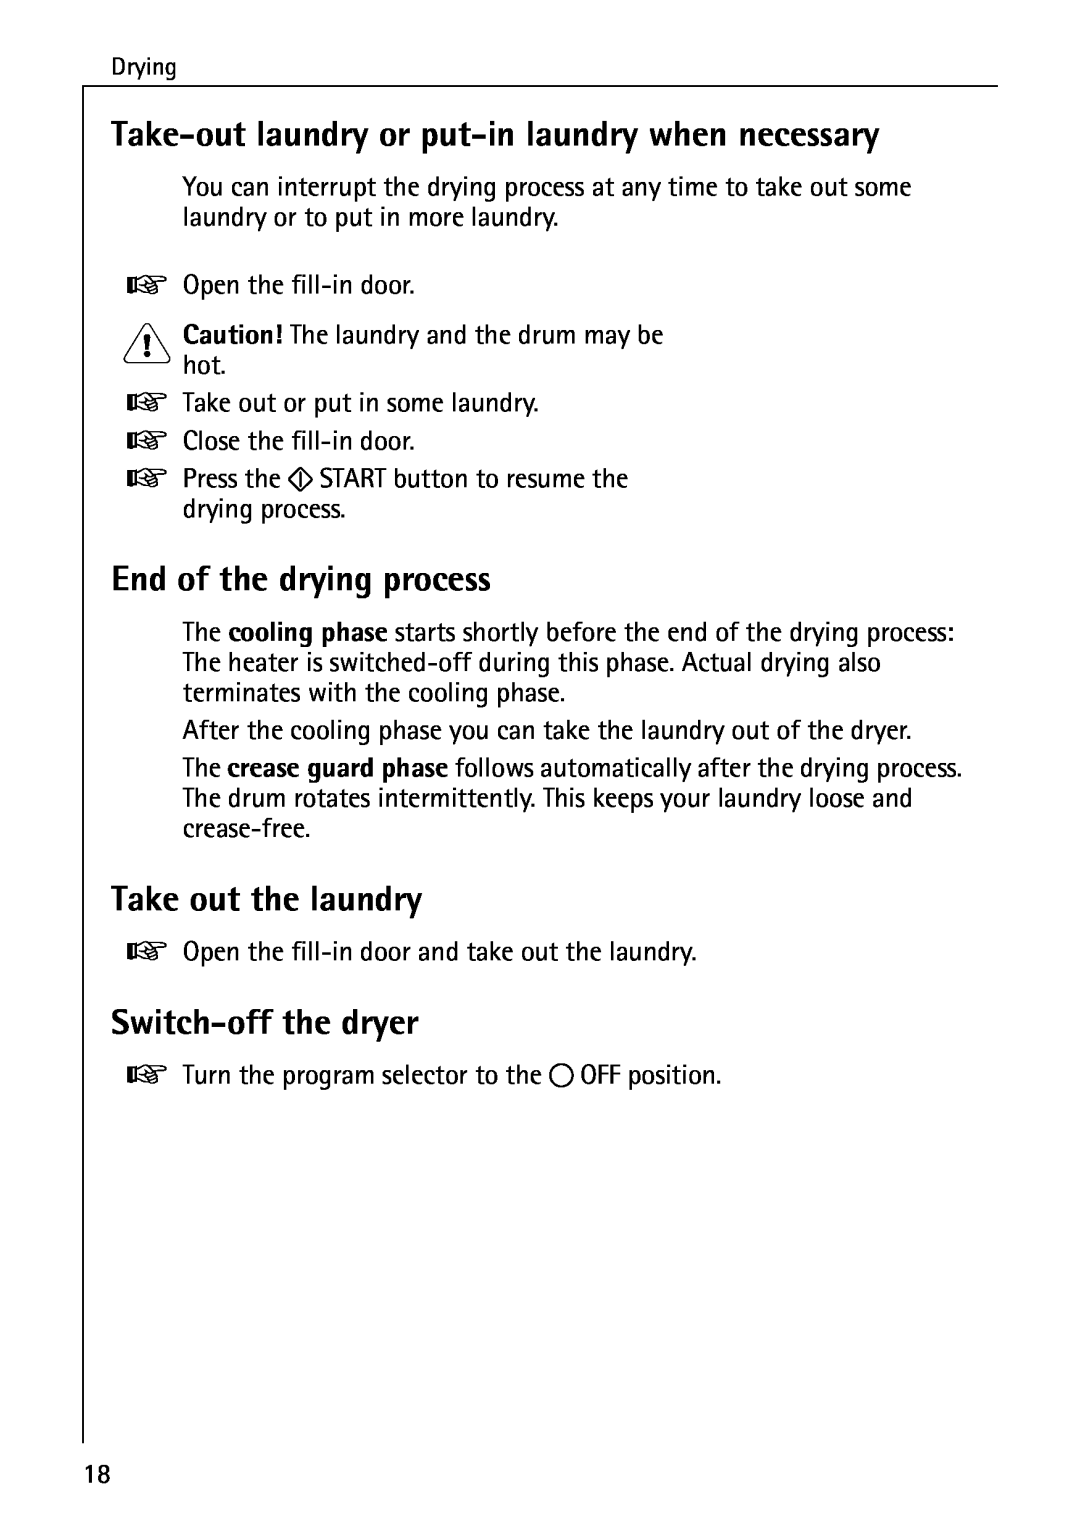 AEG 56609 Take-out laundry or put-in laundry when necessary, End of the drying process, Take out the laundry 